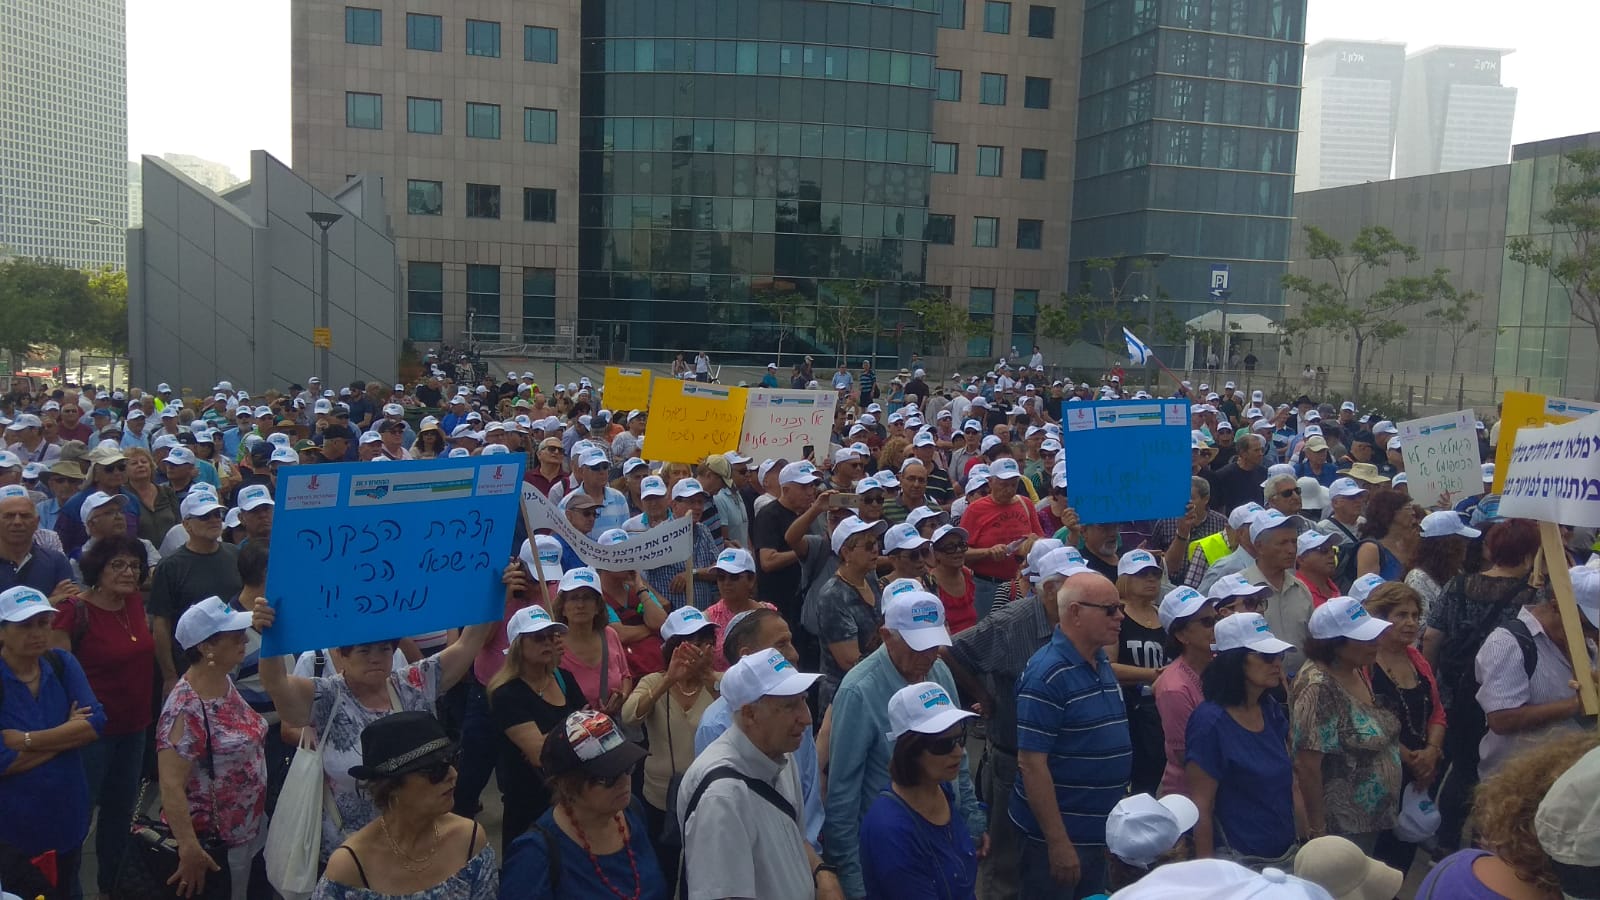 Pensioners’ demonstration outside government complex in Tel Aviv protesting cuts to old-age pension funds, May 21, 2019 (Photograph: Jonathan Kershenbaum)